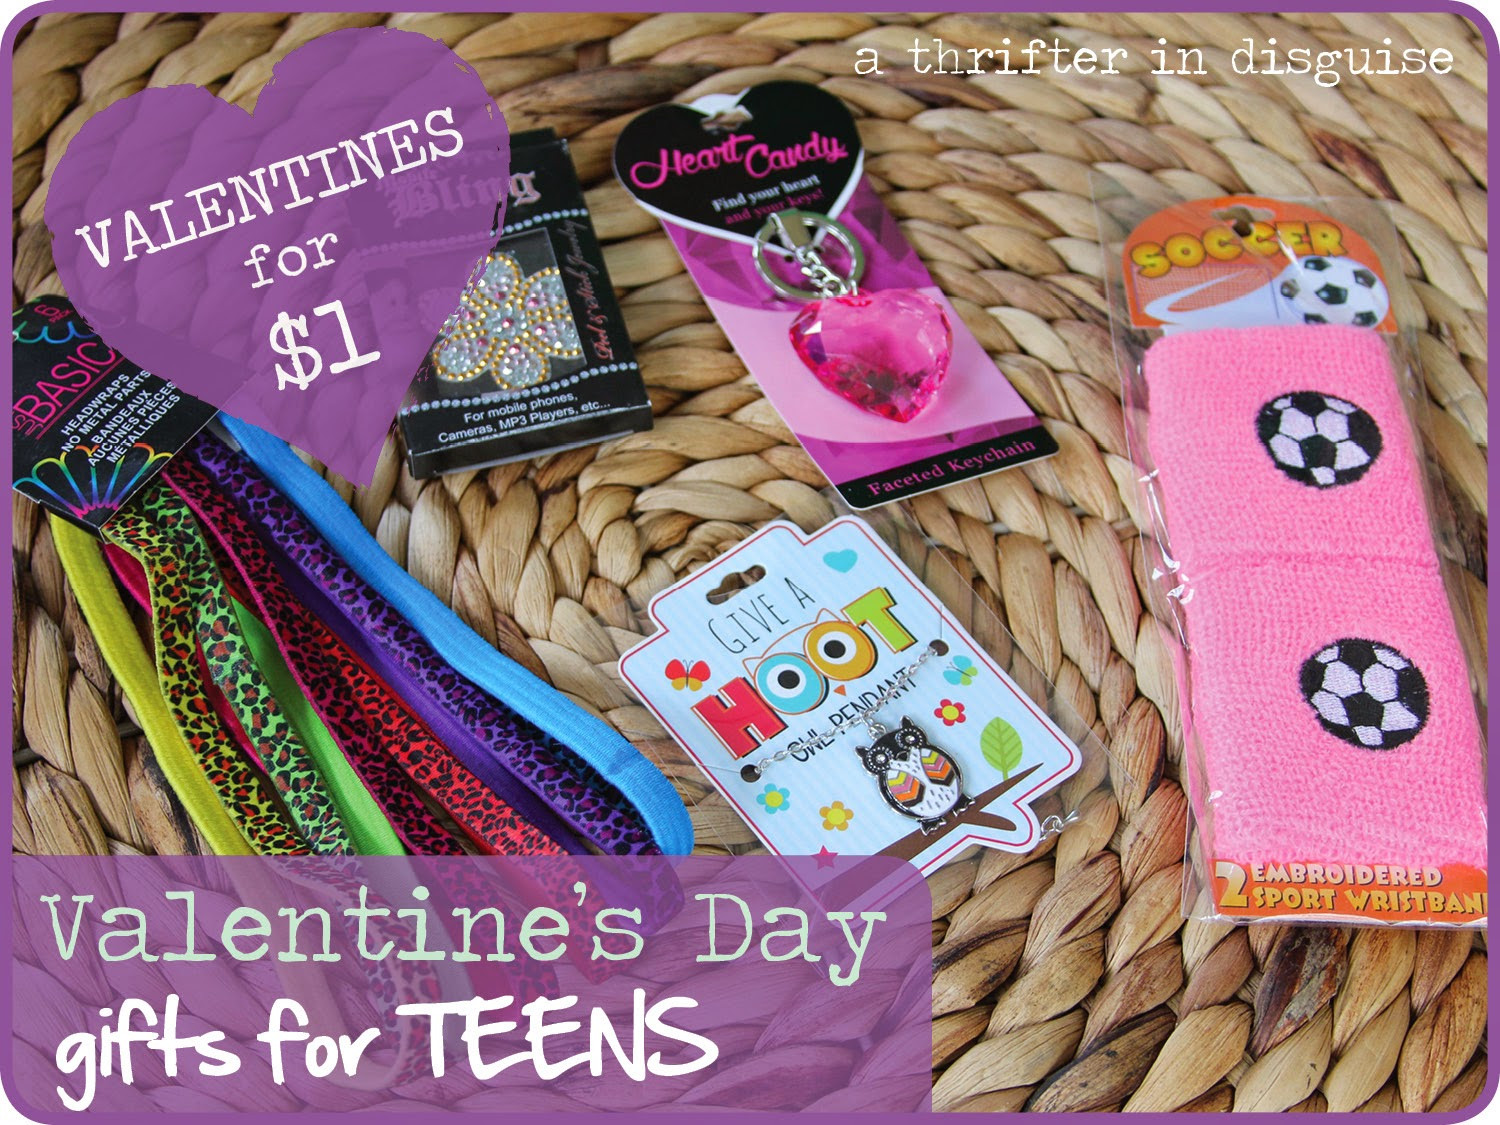 Valentine Gift Ideas For Teens
 A Thrifter in Disguise More $1 Valentine s Day Gifts